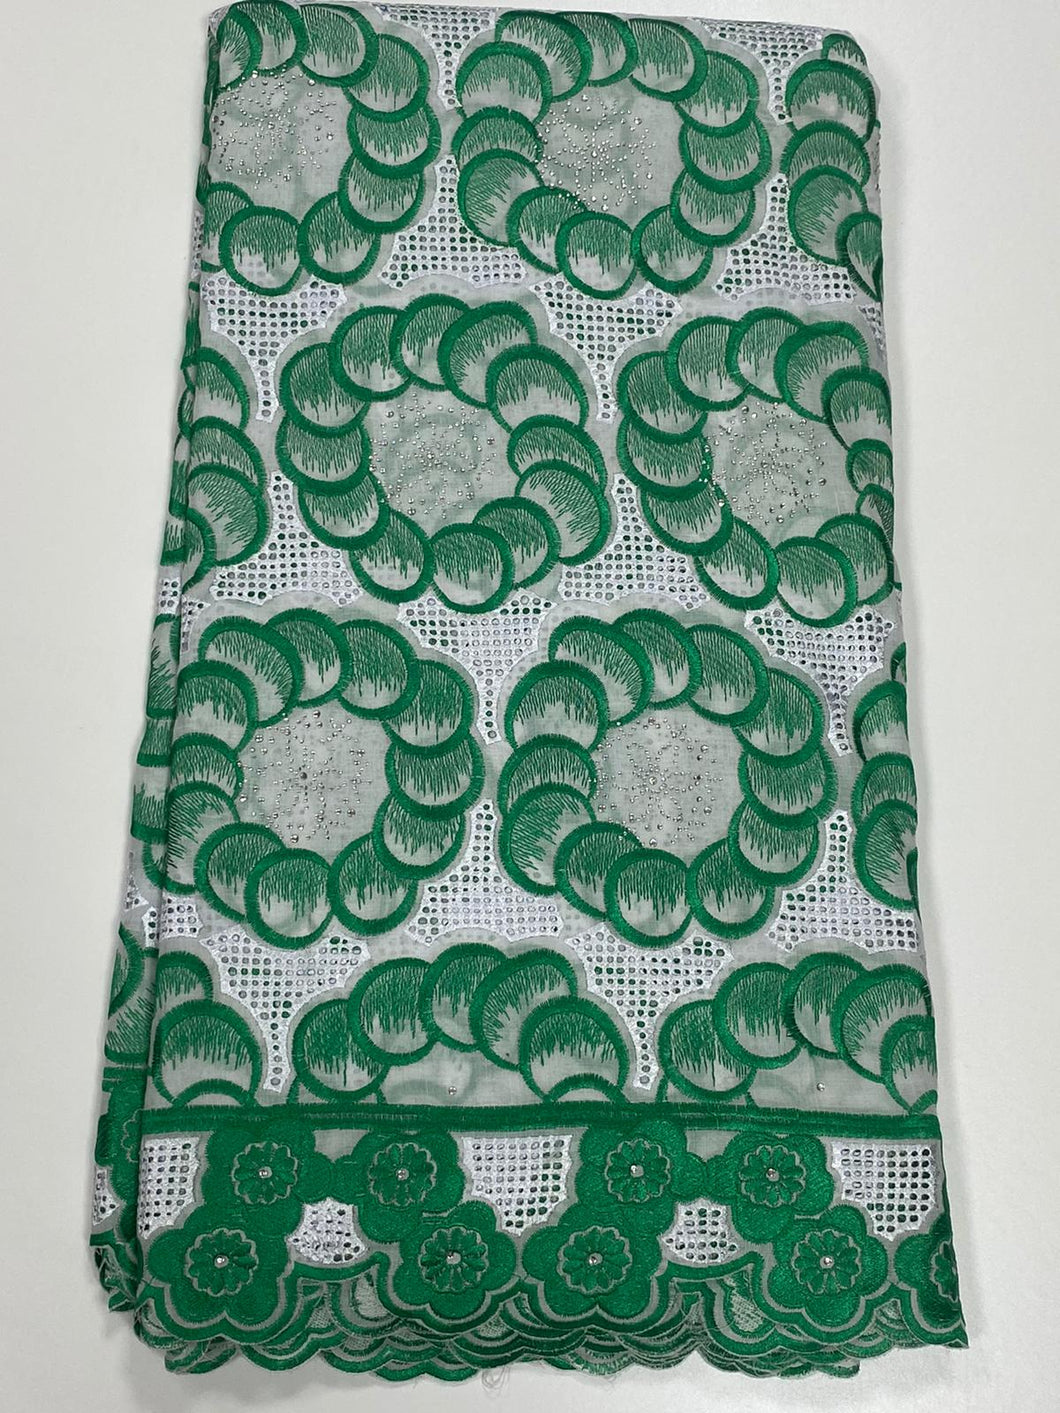 Green and White Lace - 5 Yards